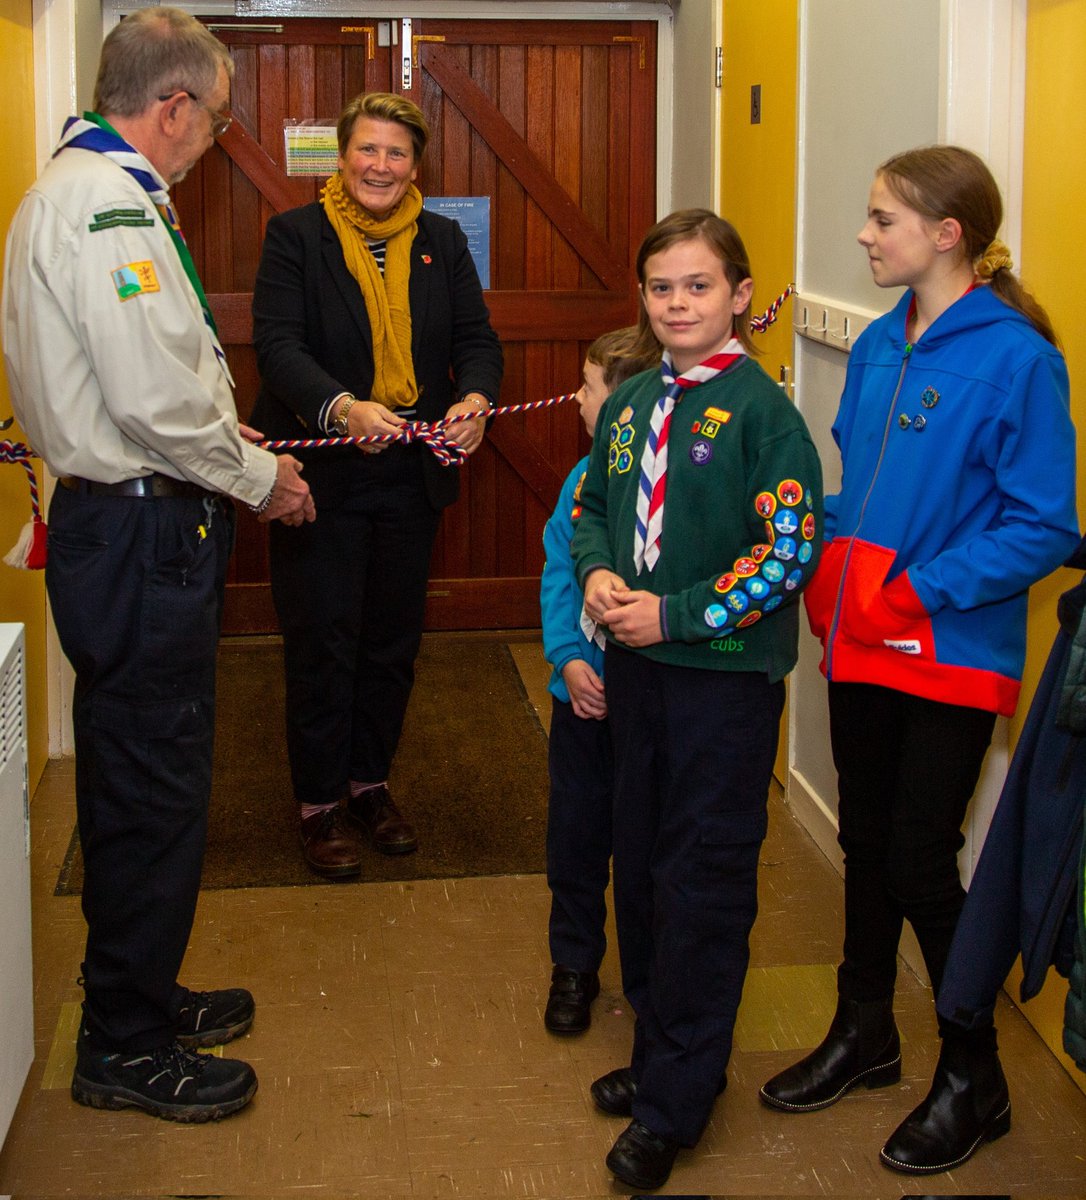 During Parliament Week, I had the pleasure of opening the new guide & scout facility in Martock & speaking to both groups about my work. They had some very insightful questions for me, including 'Who makes the final decision in Parliament?' & 'What does the HofC smell like?'.